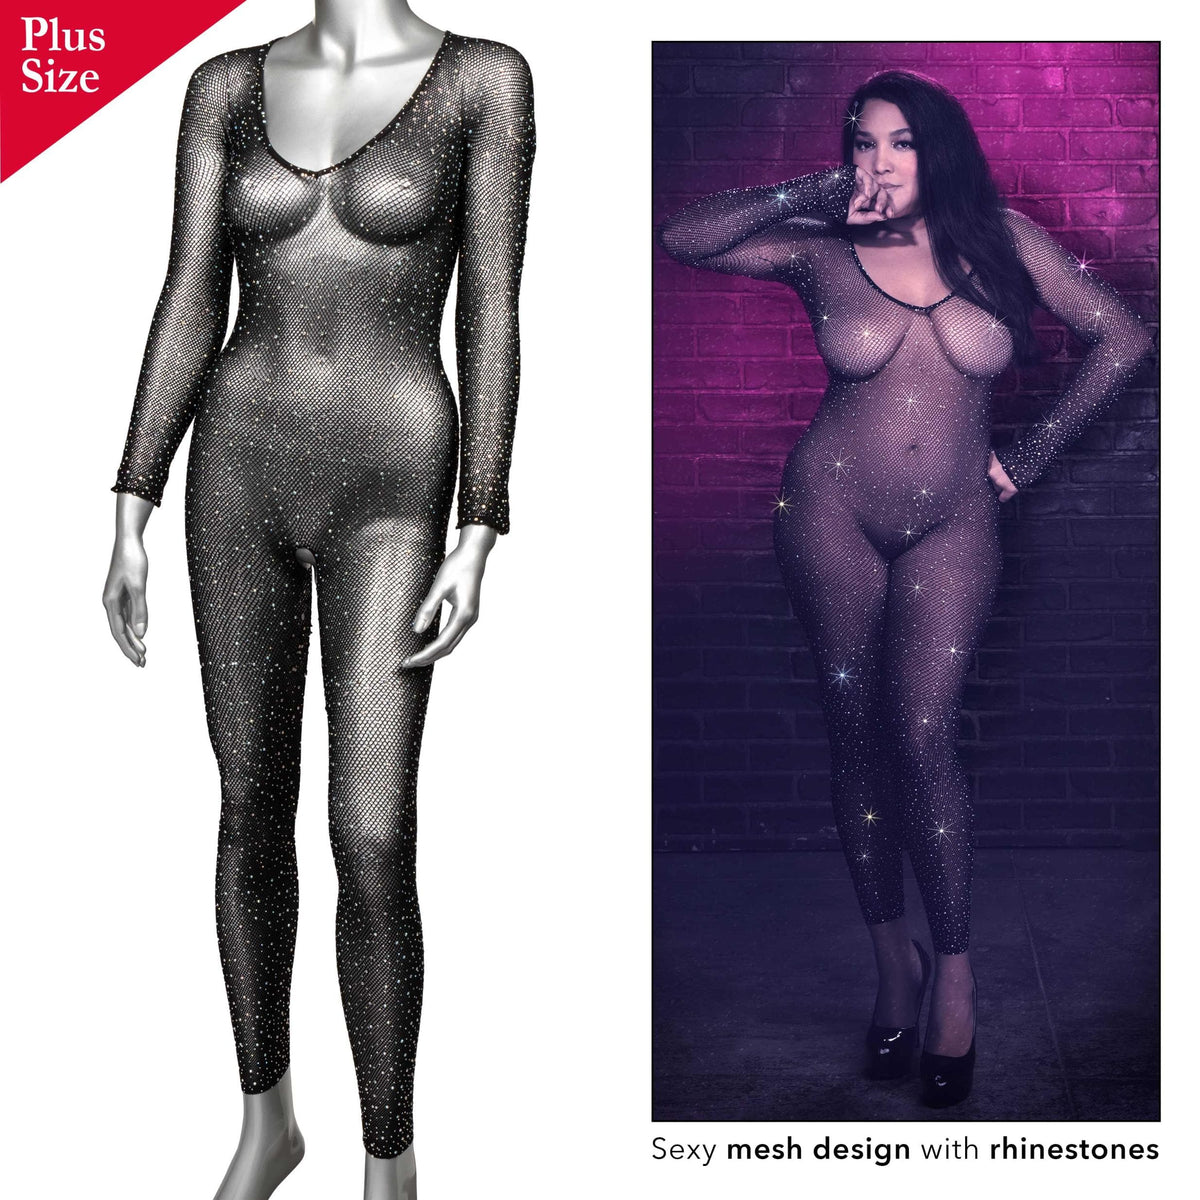 radiance crotchless full body suit queen black